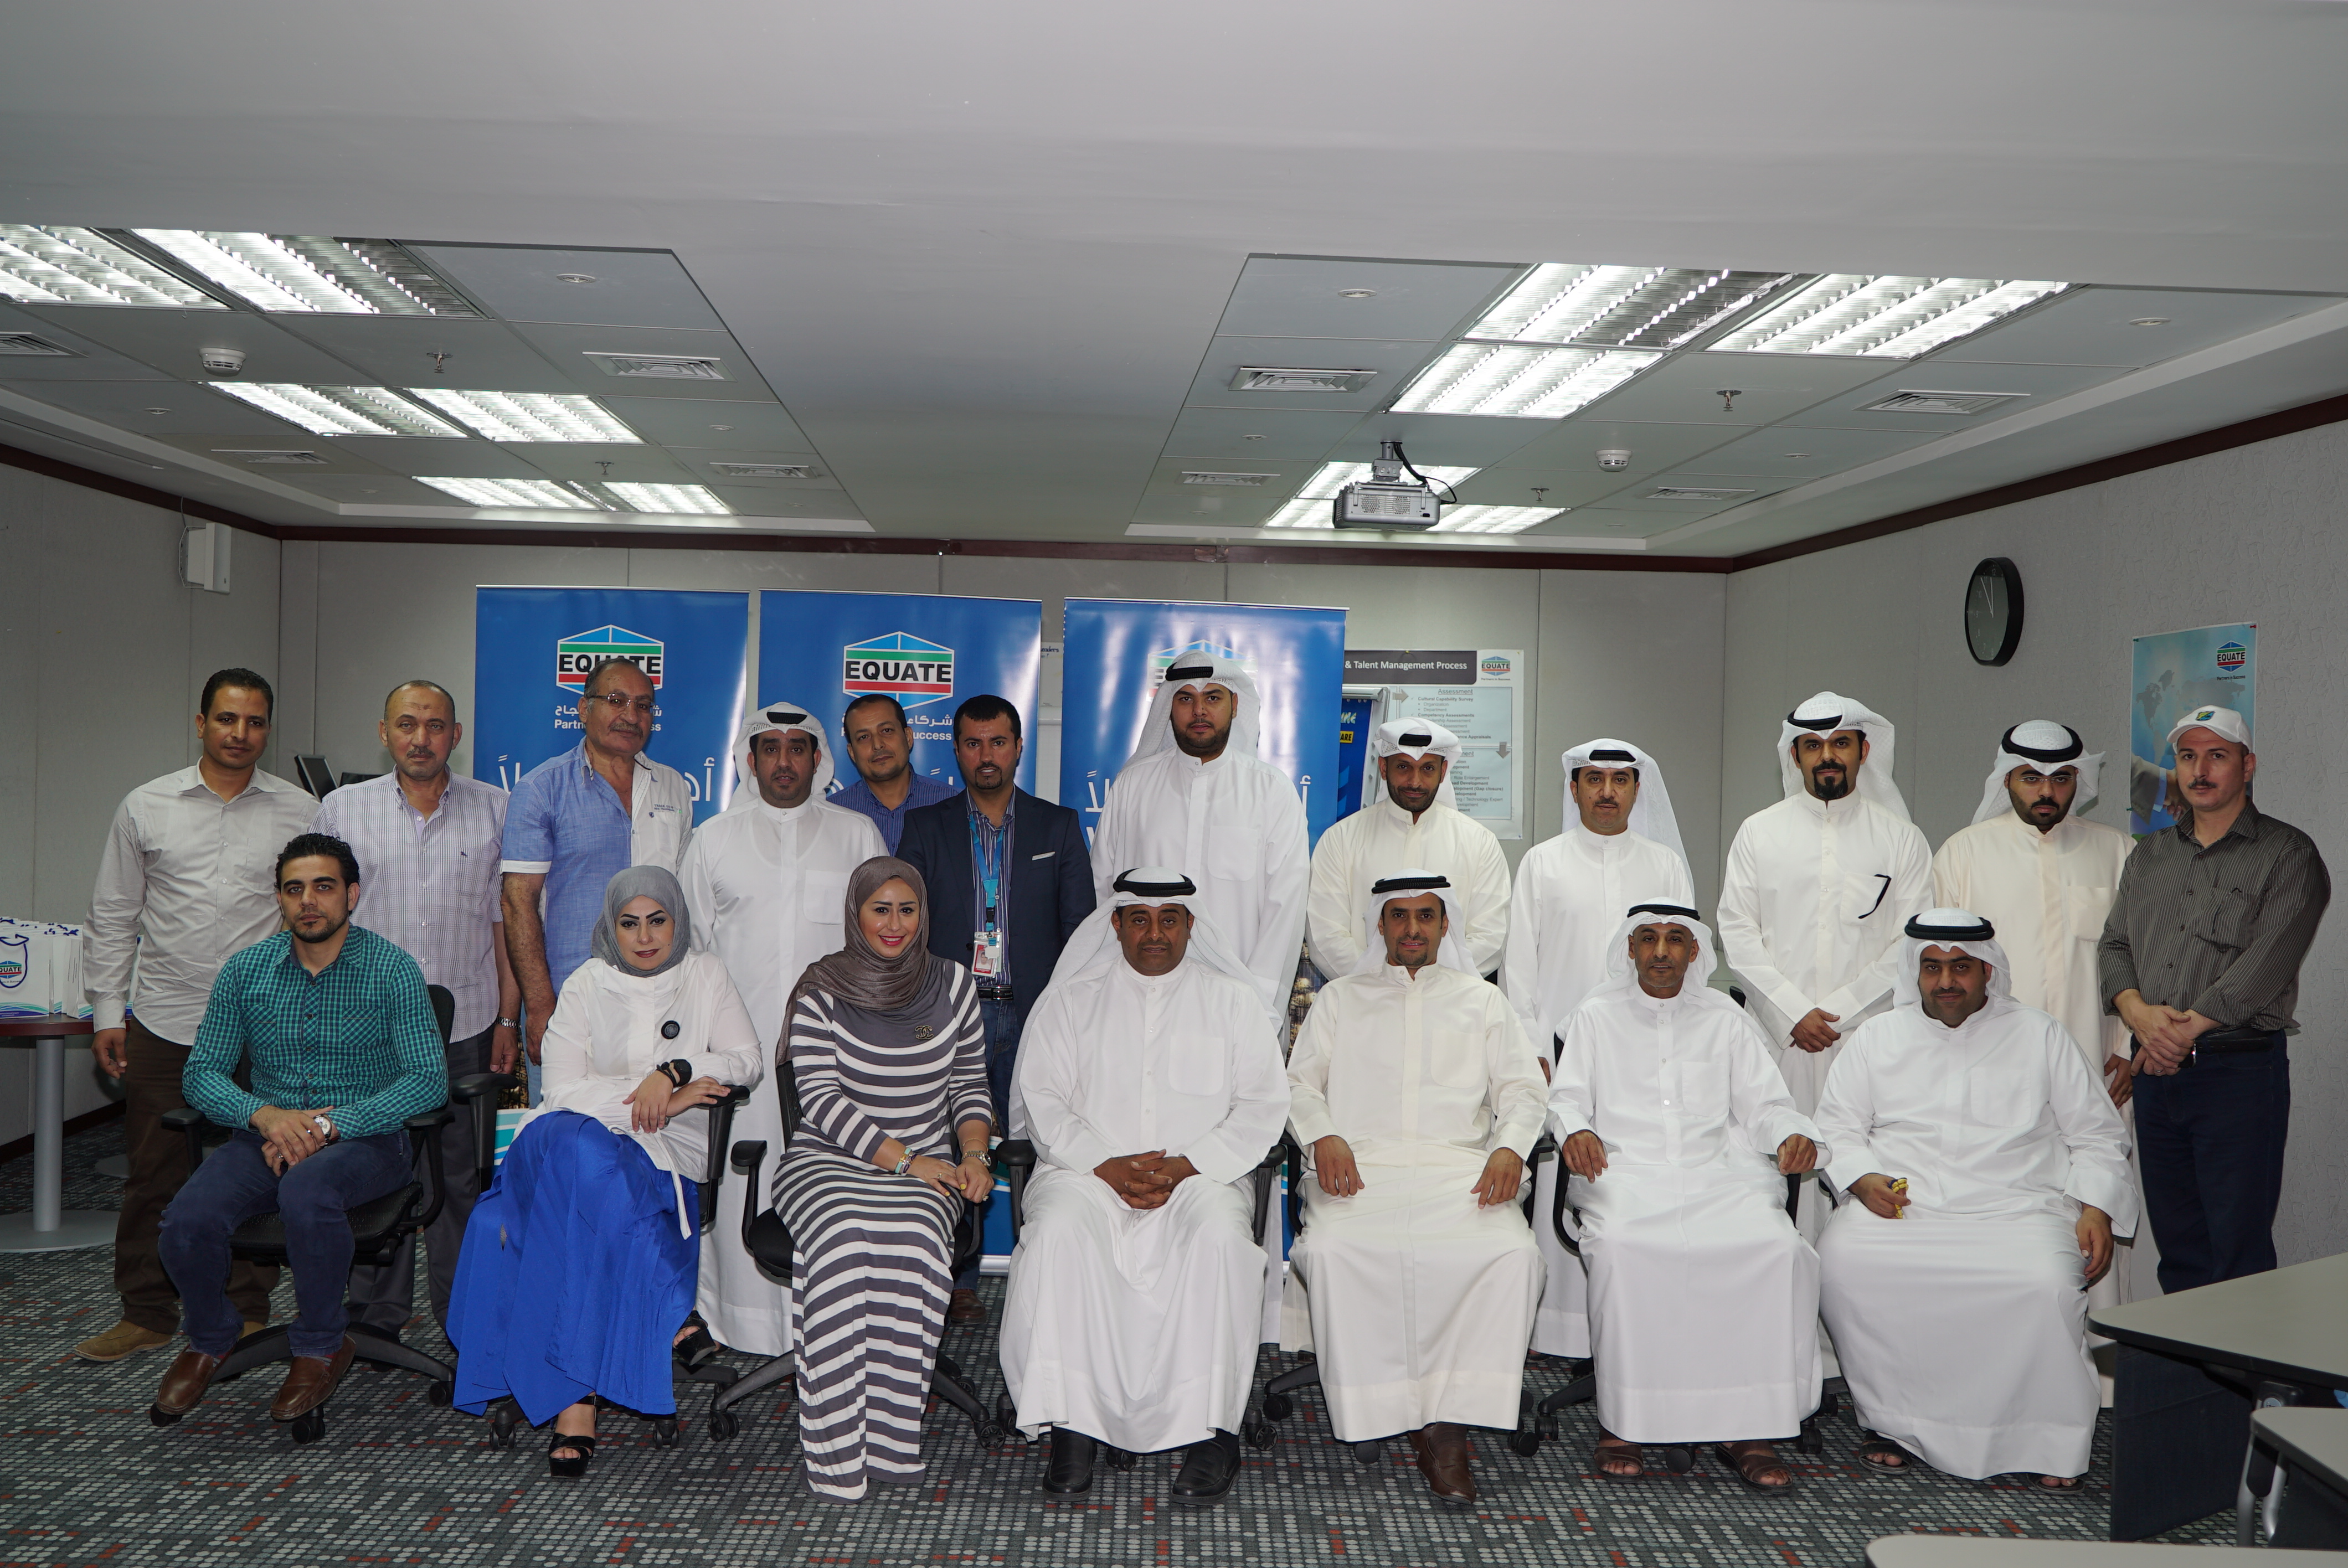 EQUATE hosts Kuwait University’s Security & Safety Department